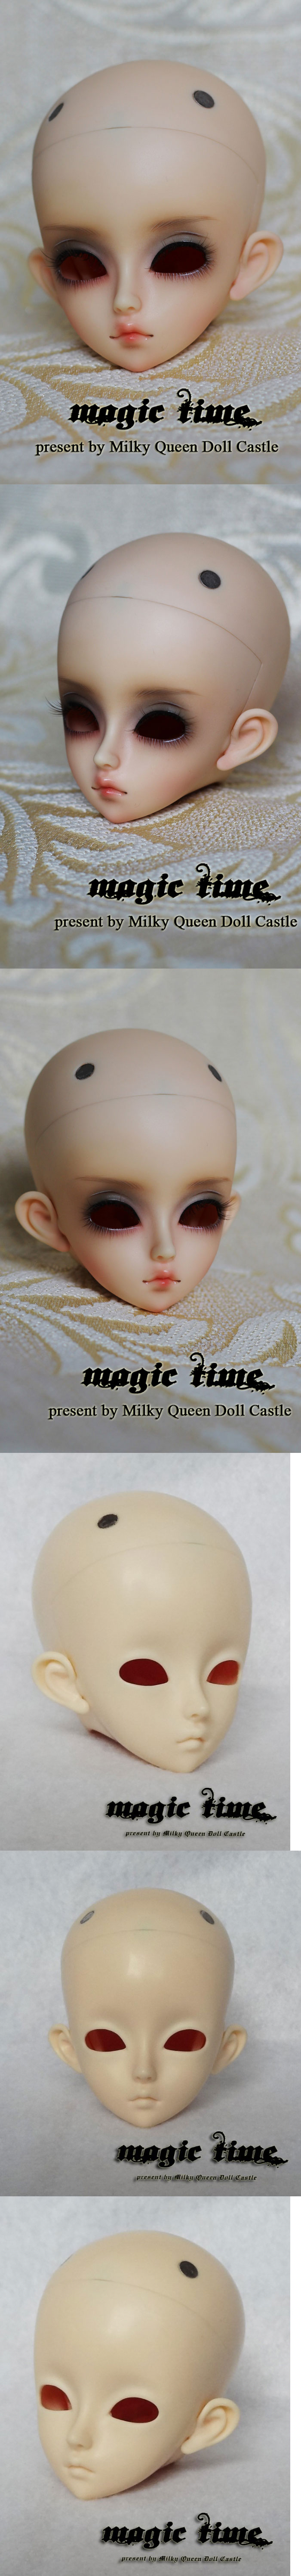 BJD Rachael Head for MSD Size Ball-jointed doll